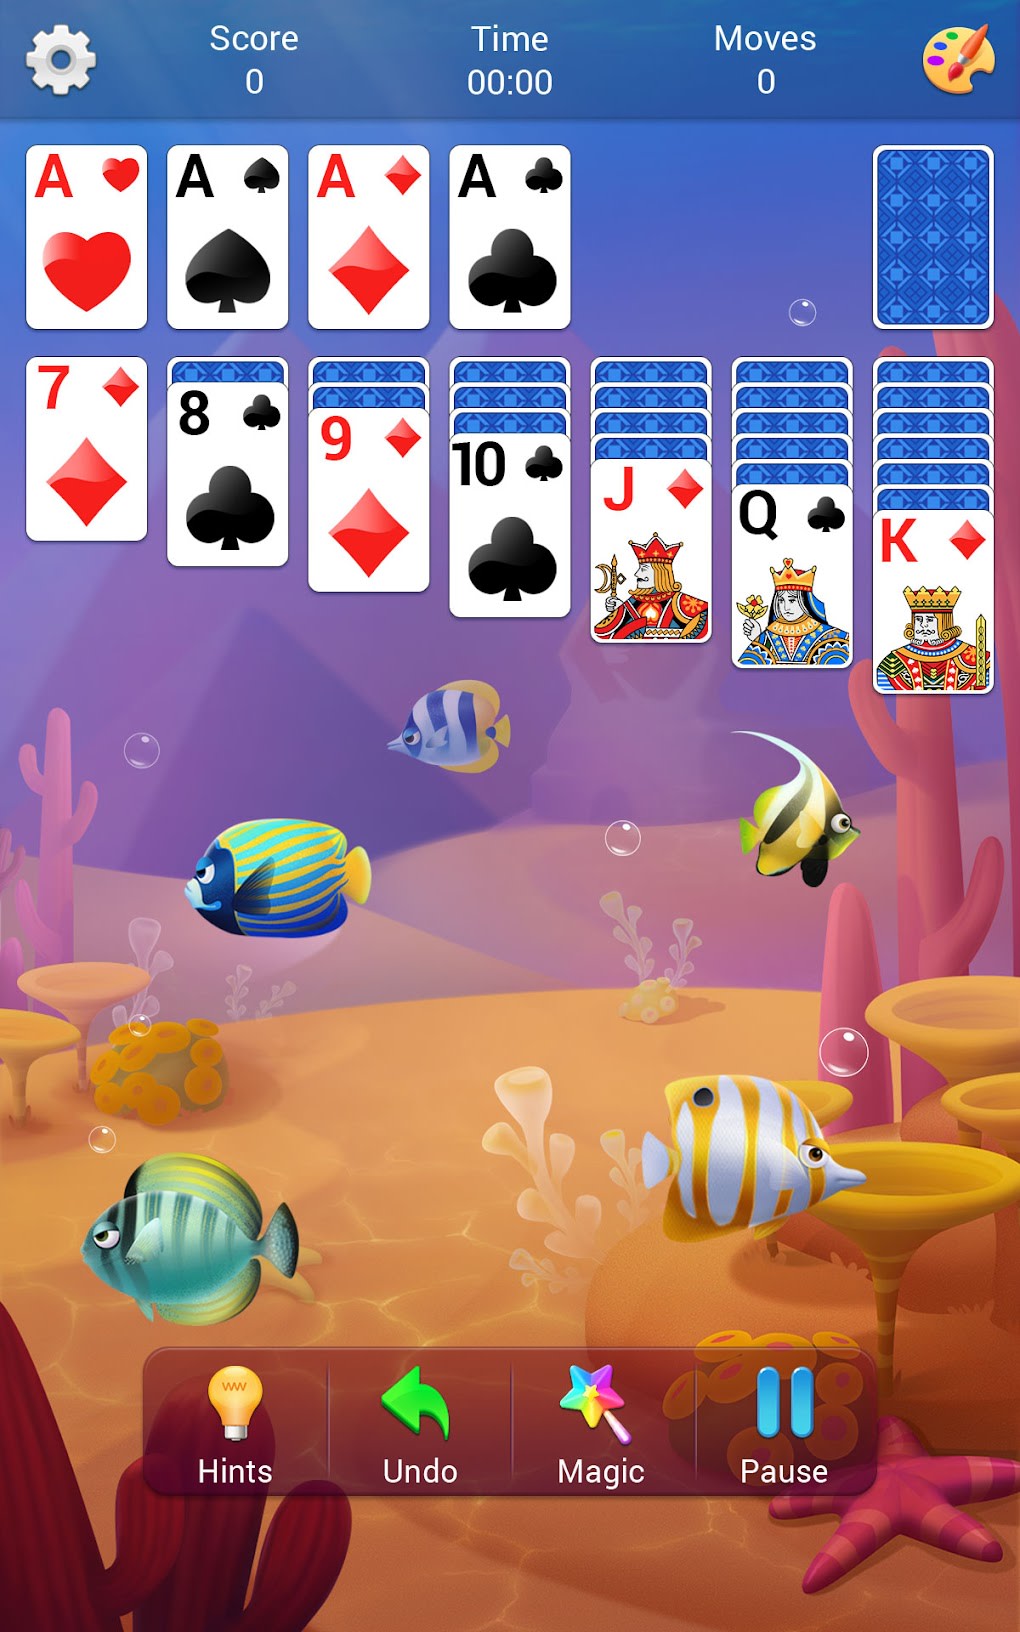 SolitaireCG -- Solitaire Card Games for Android™